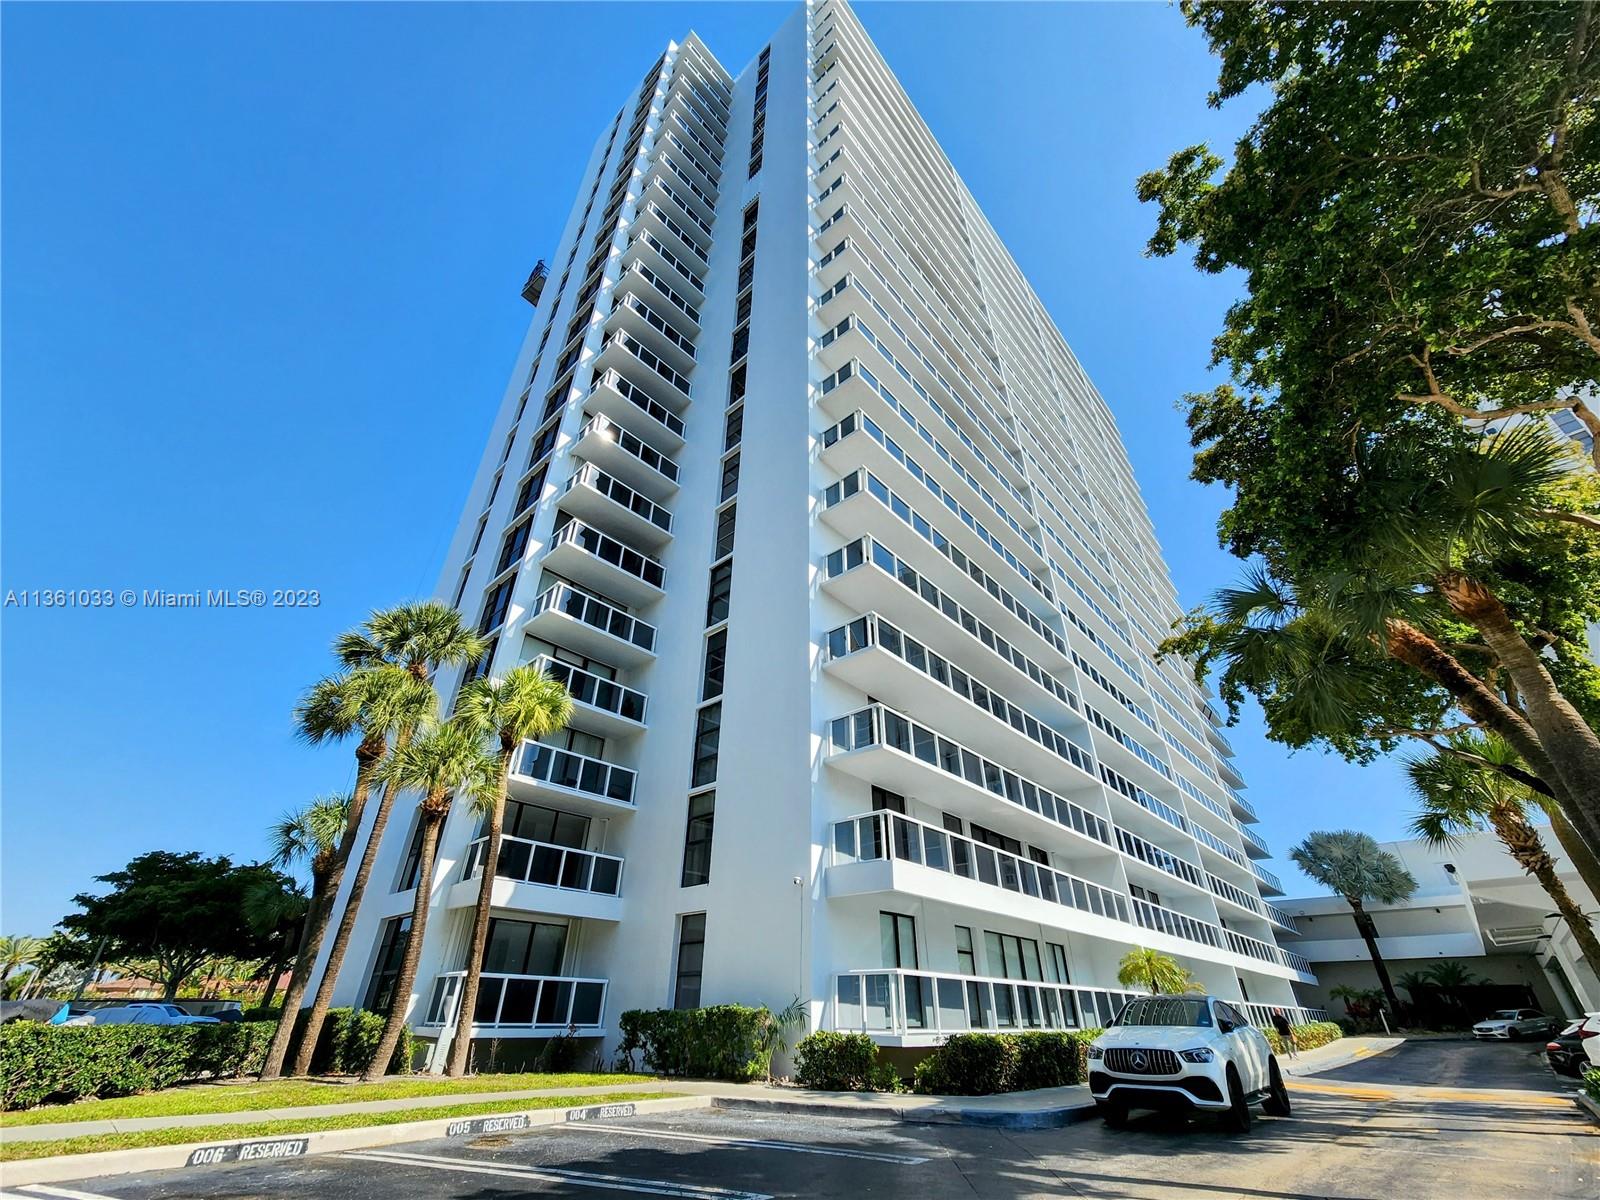 20505 E Country Club Dr #534 For Sale A11361033, FL